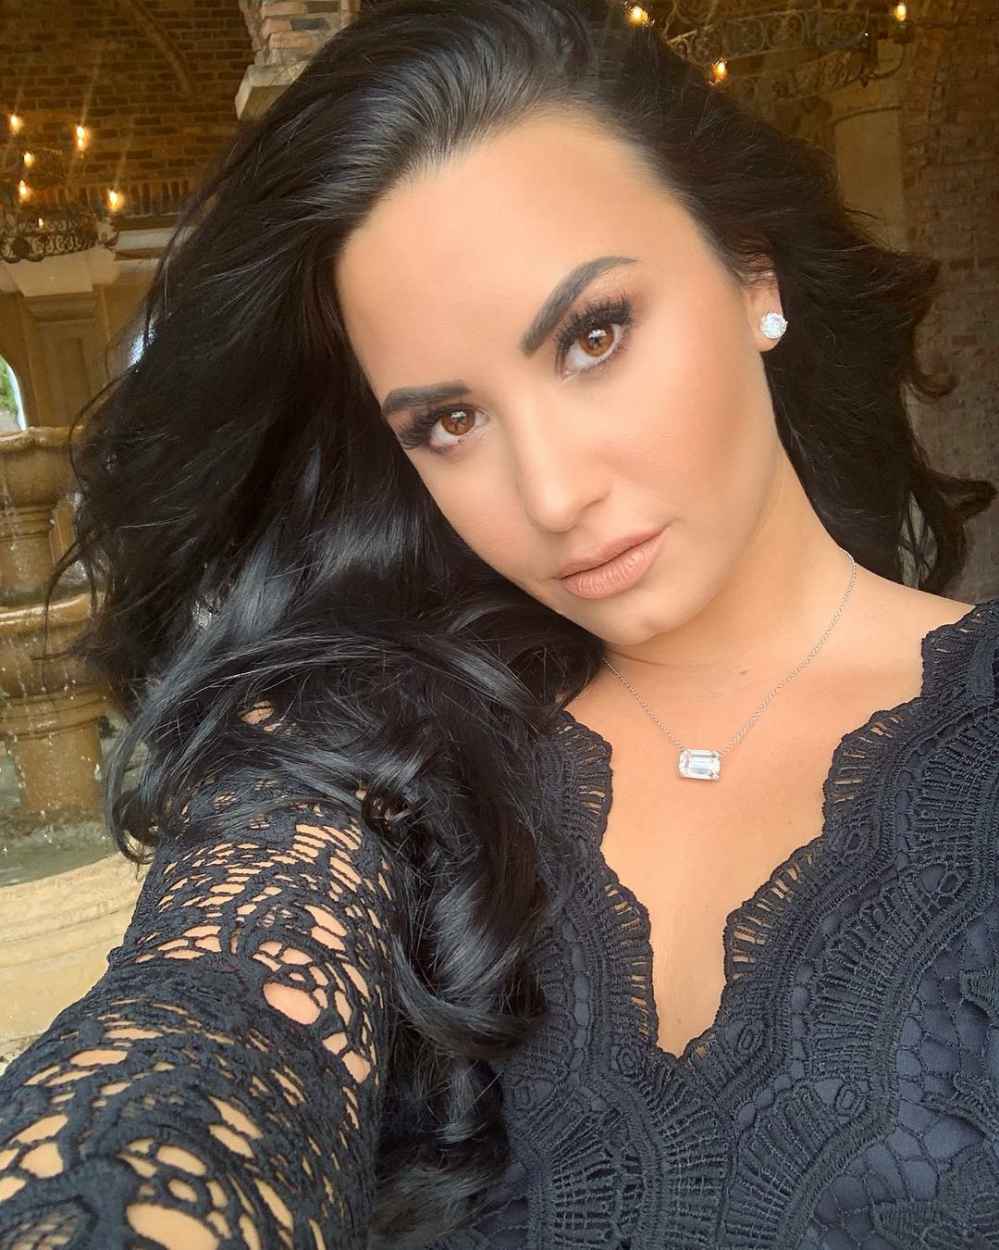 Demi Lovato Shares a Glimpse of Her $86 Bridesmaid Dress for Her Best Friend's Wedding